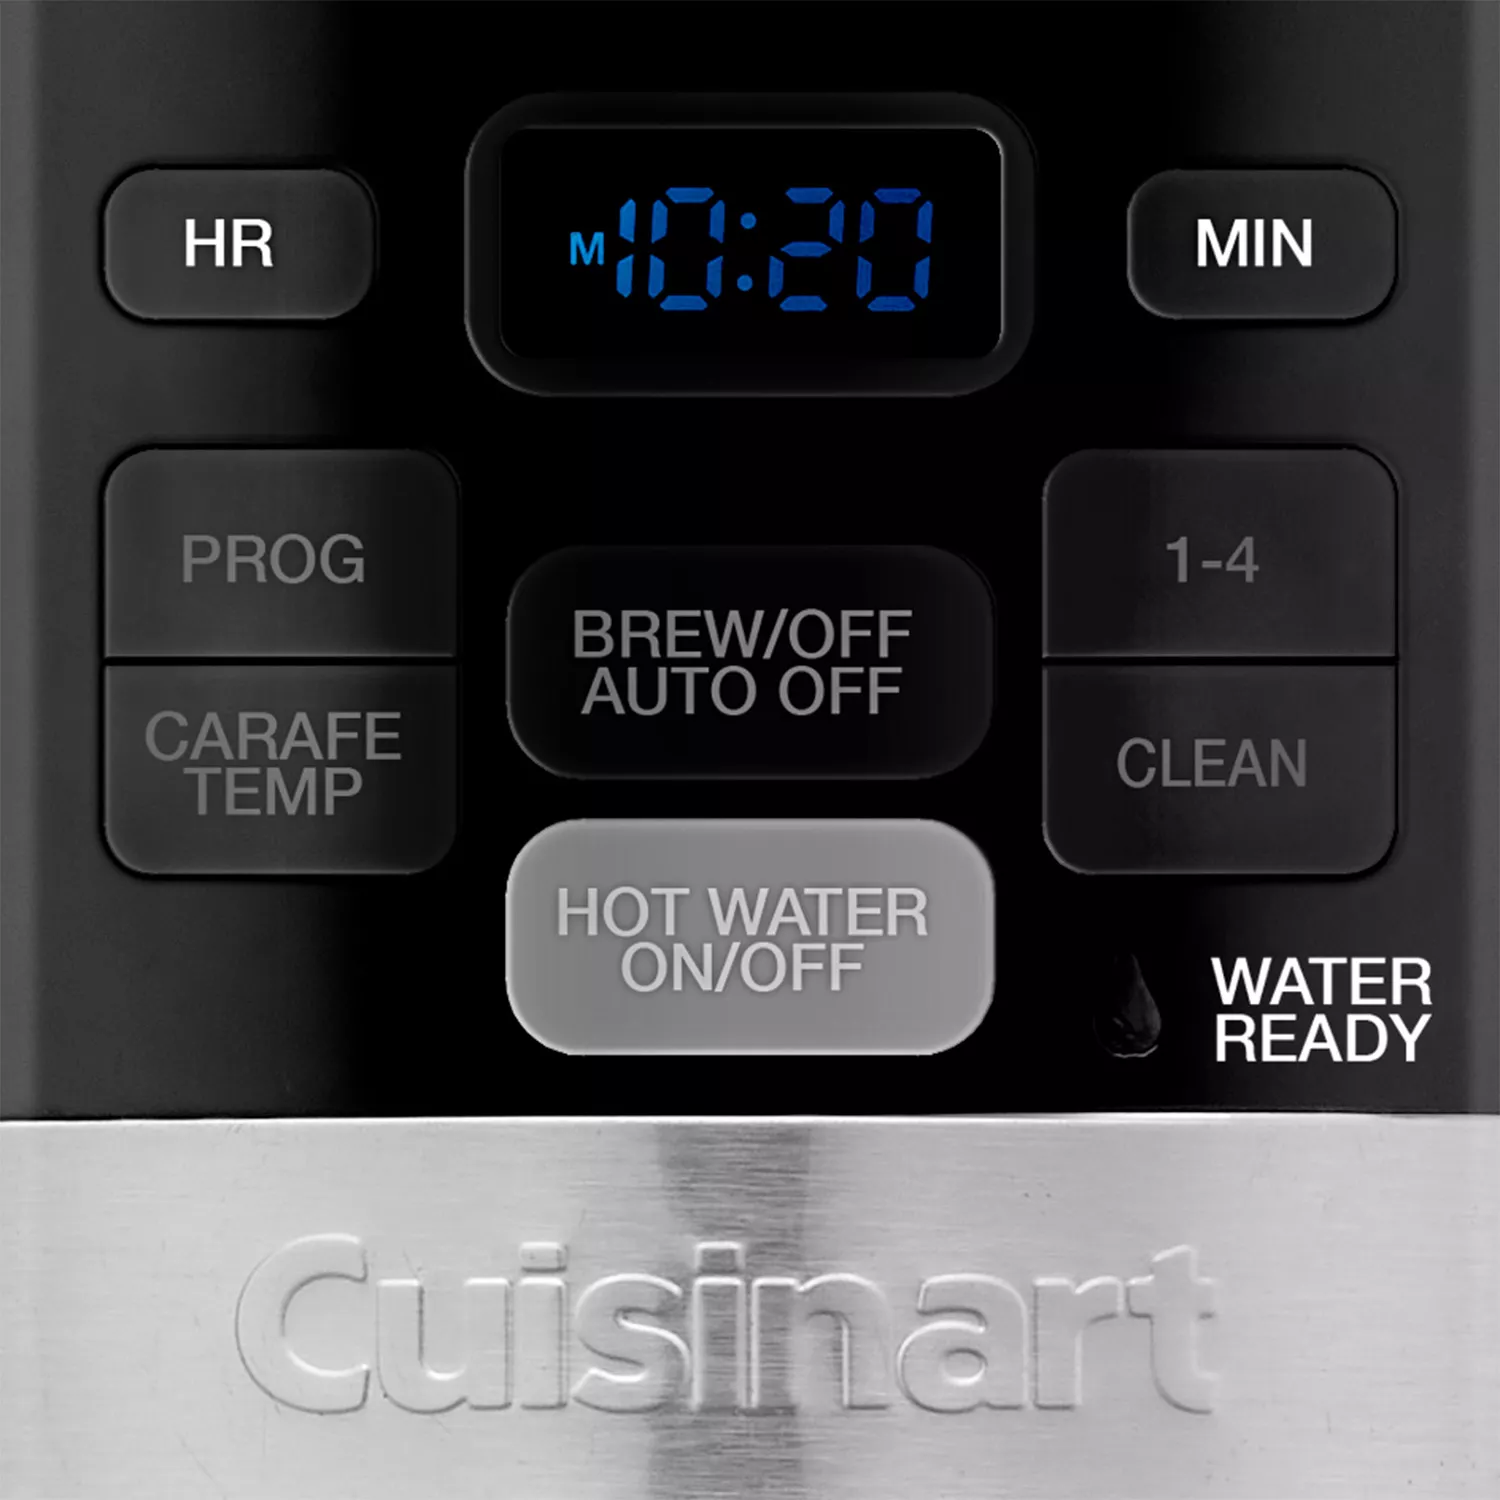 Cuisinart 12 Cup Programmable Stainless Steel Coffee Maker - Power Townsend  Company